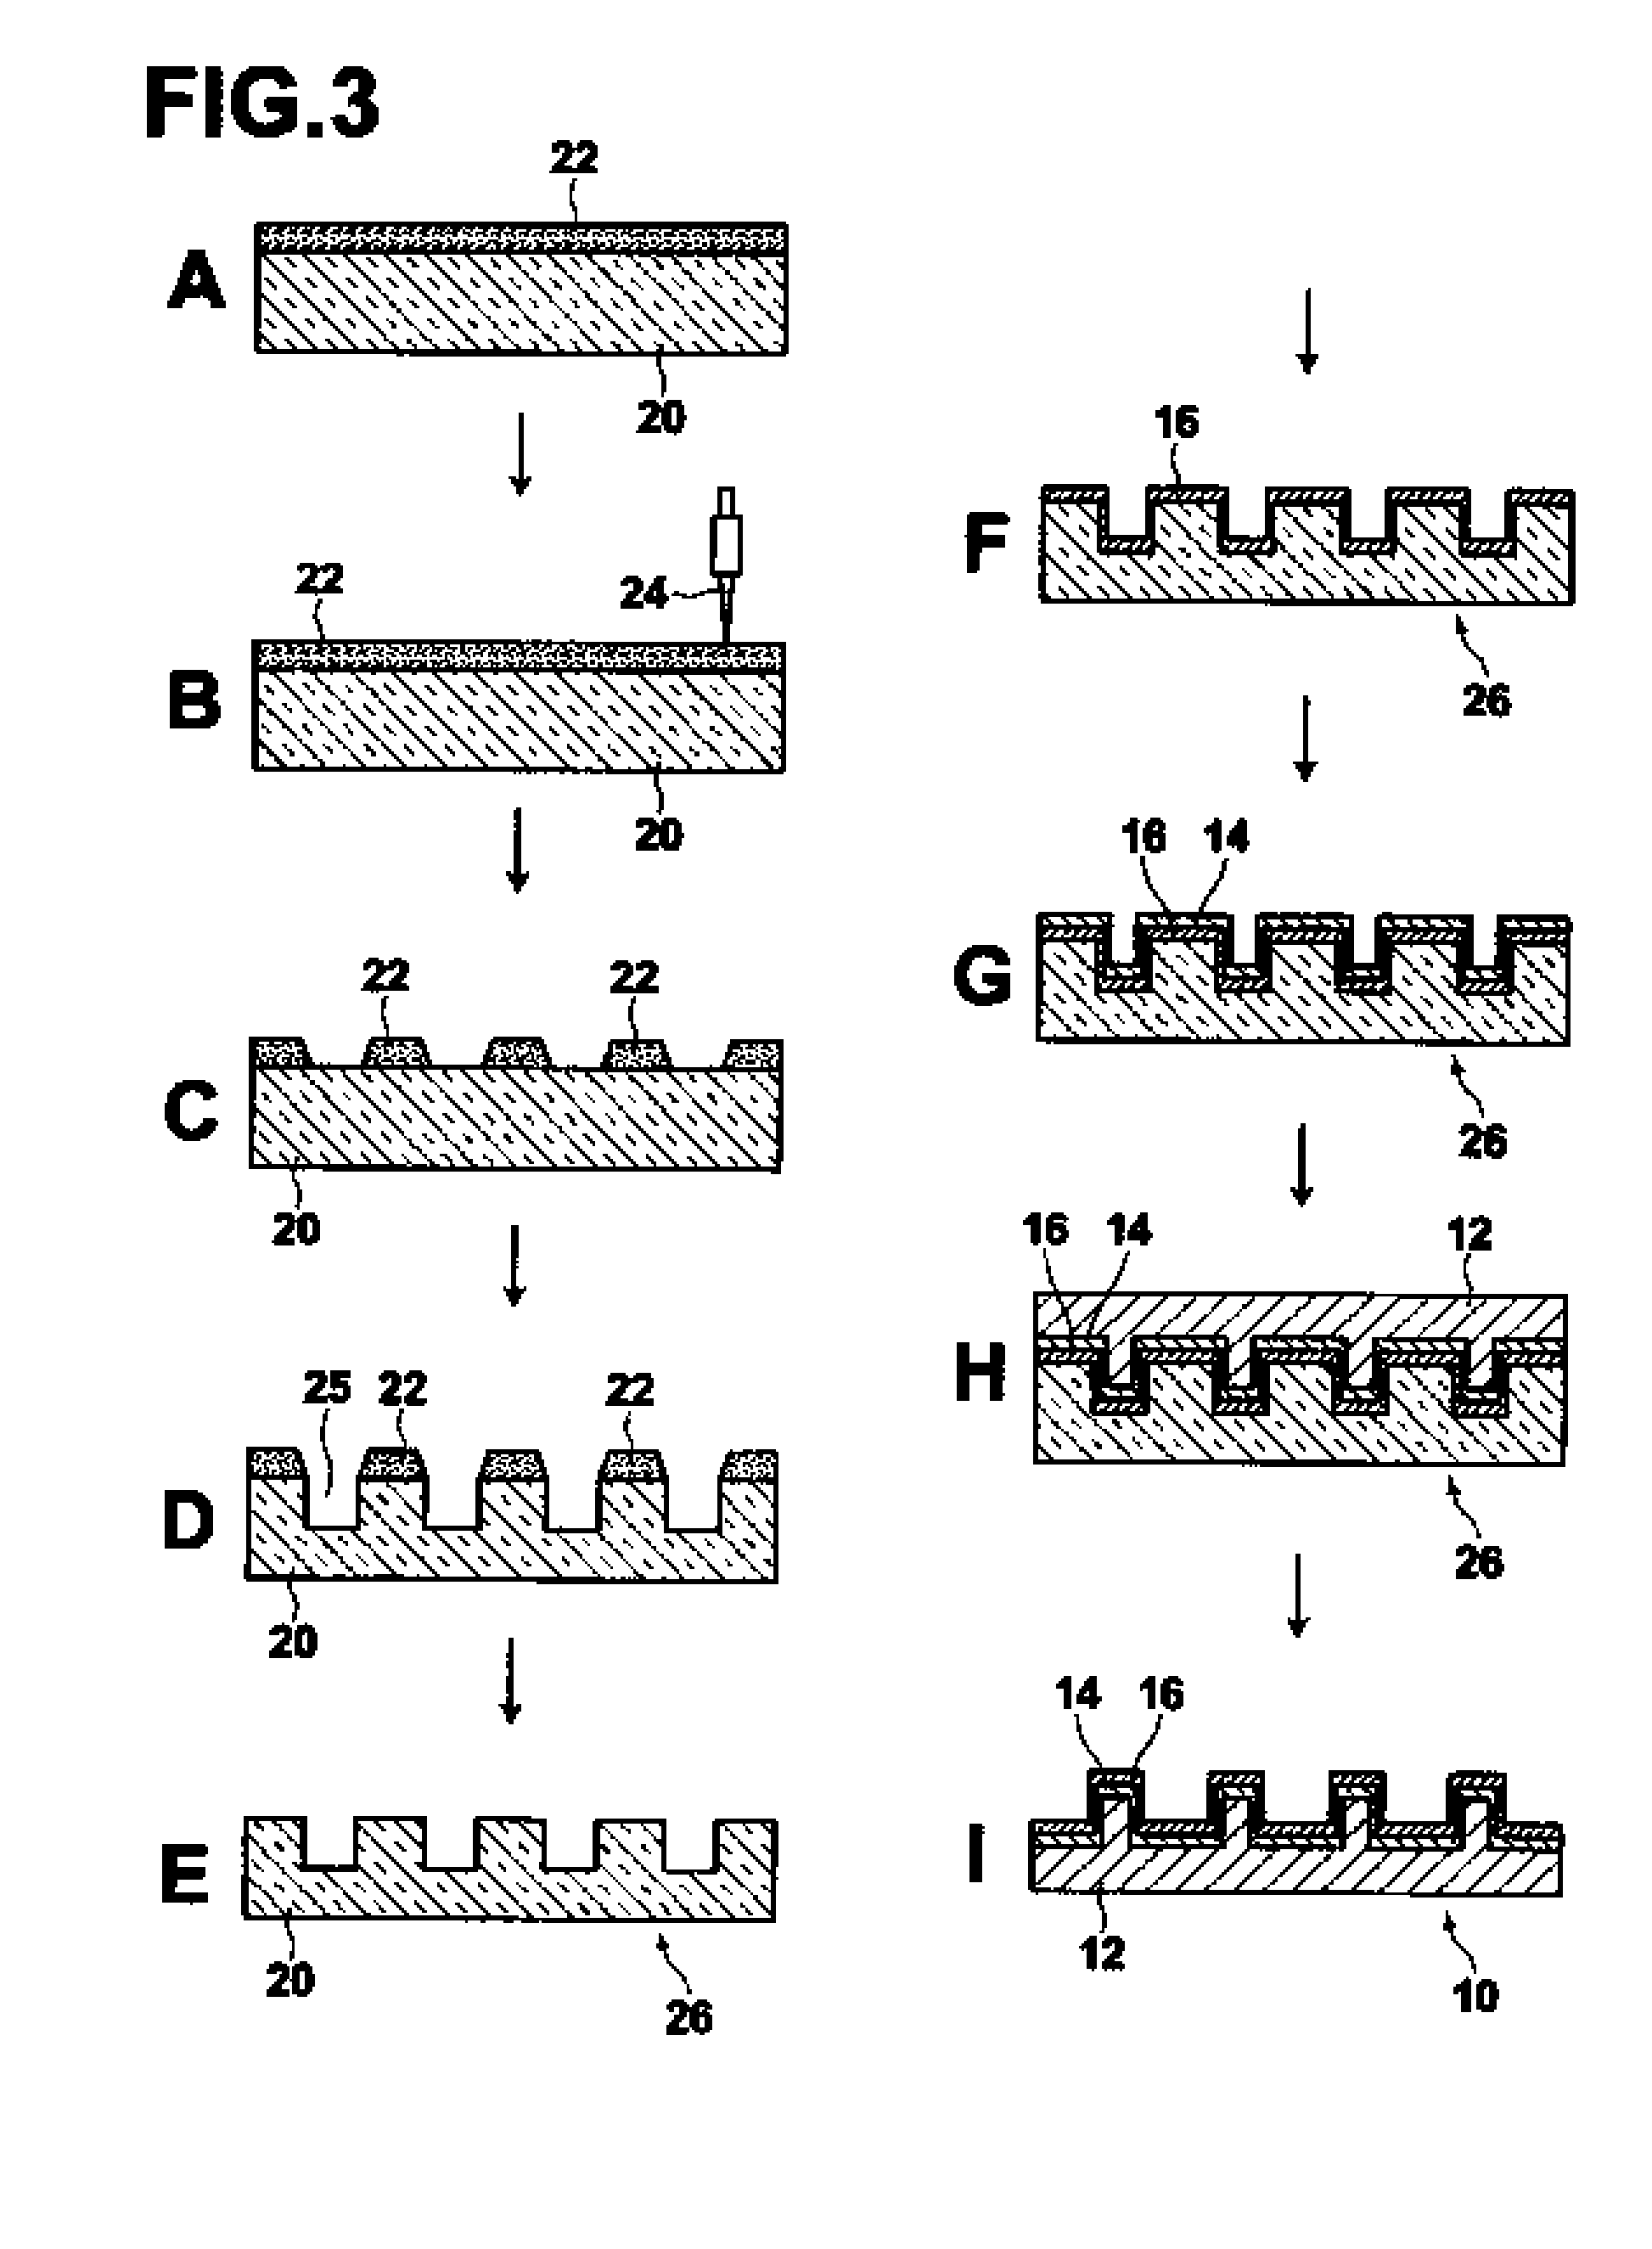 Mold and method for producing the same